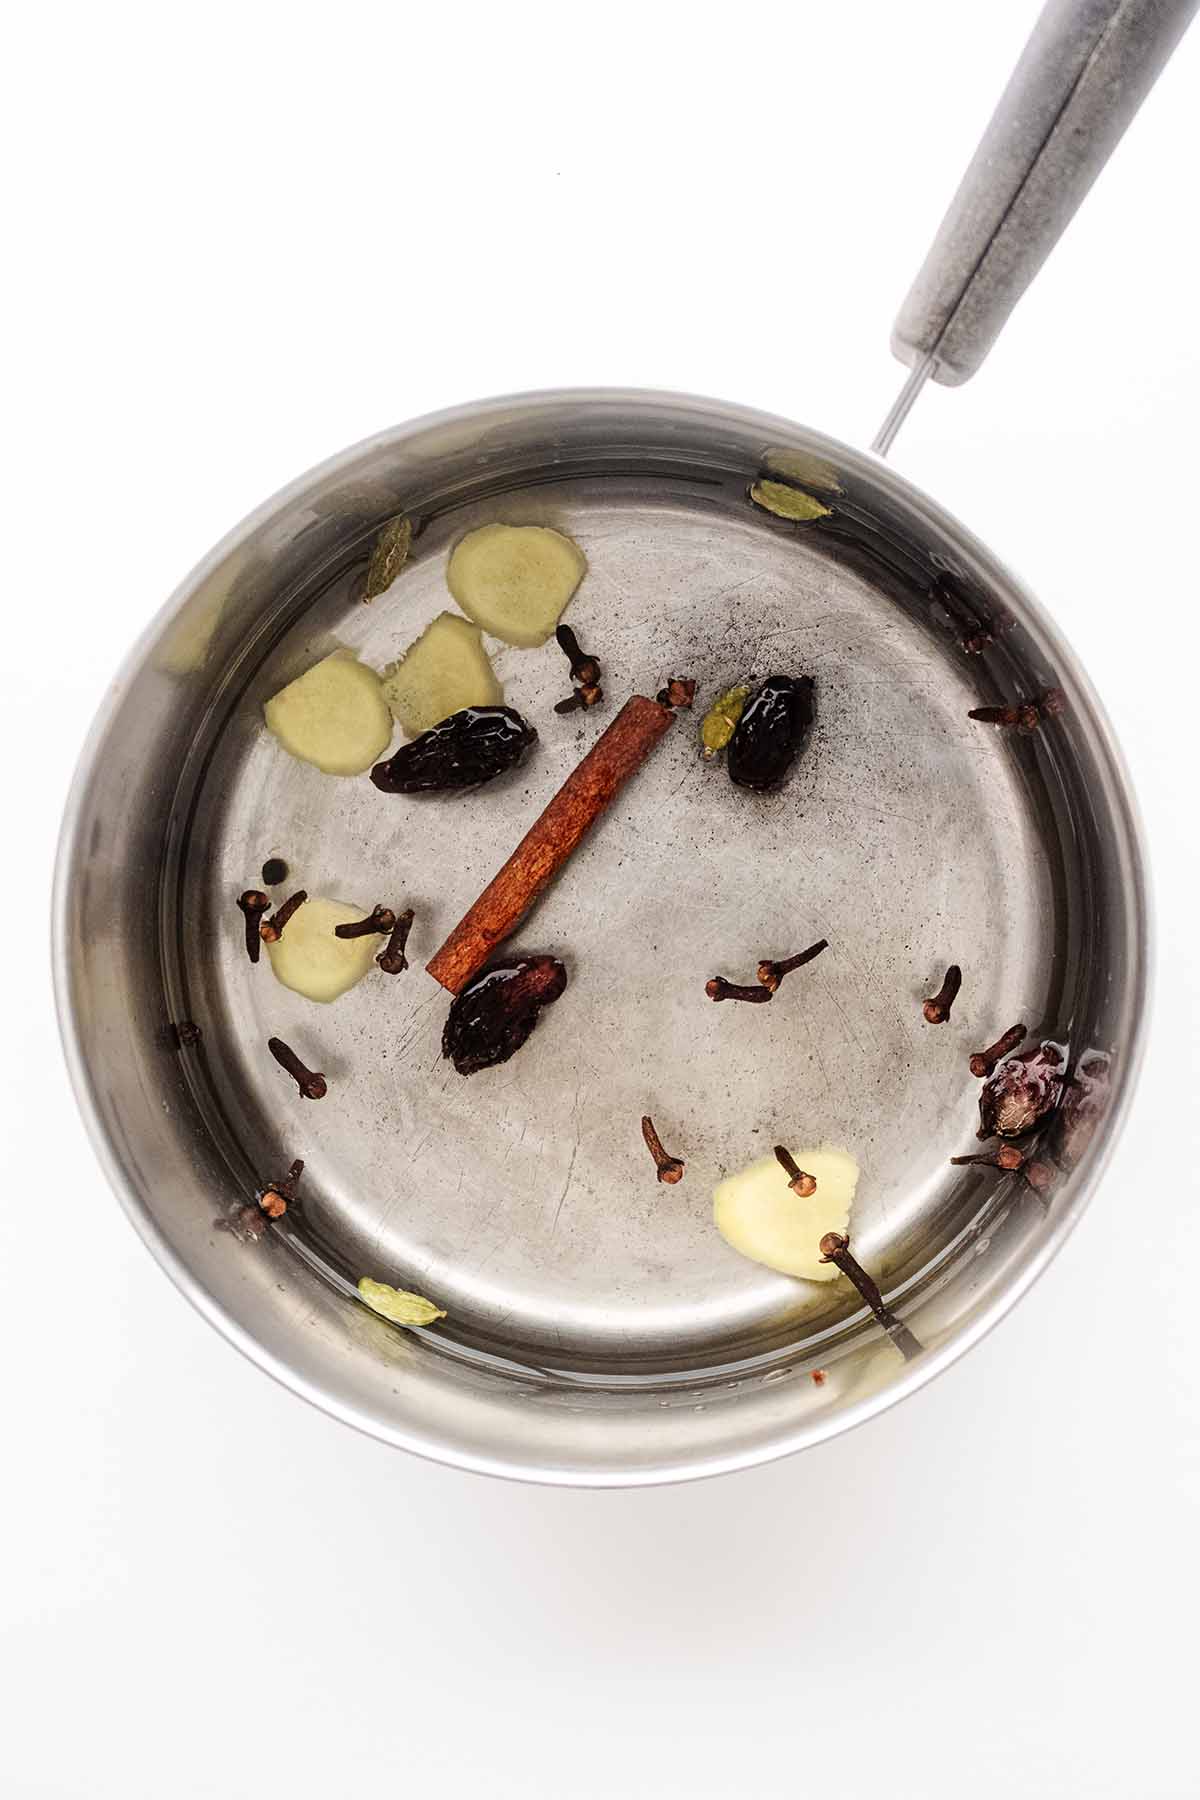 Overhead view of fresh spices in a saucepan with water